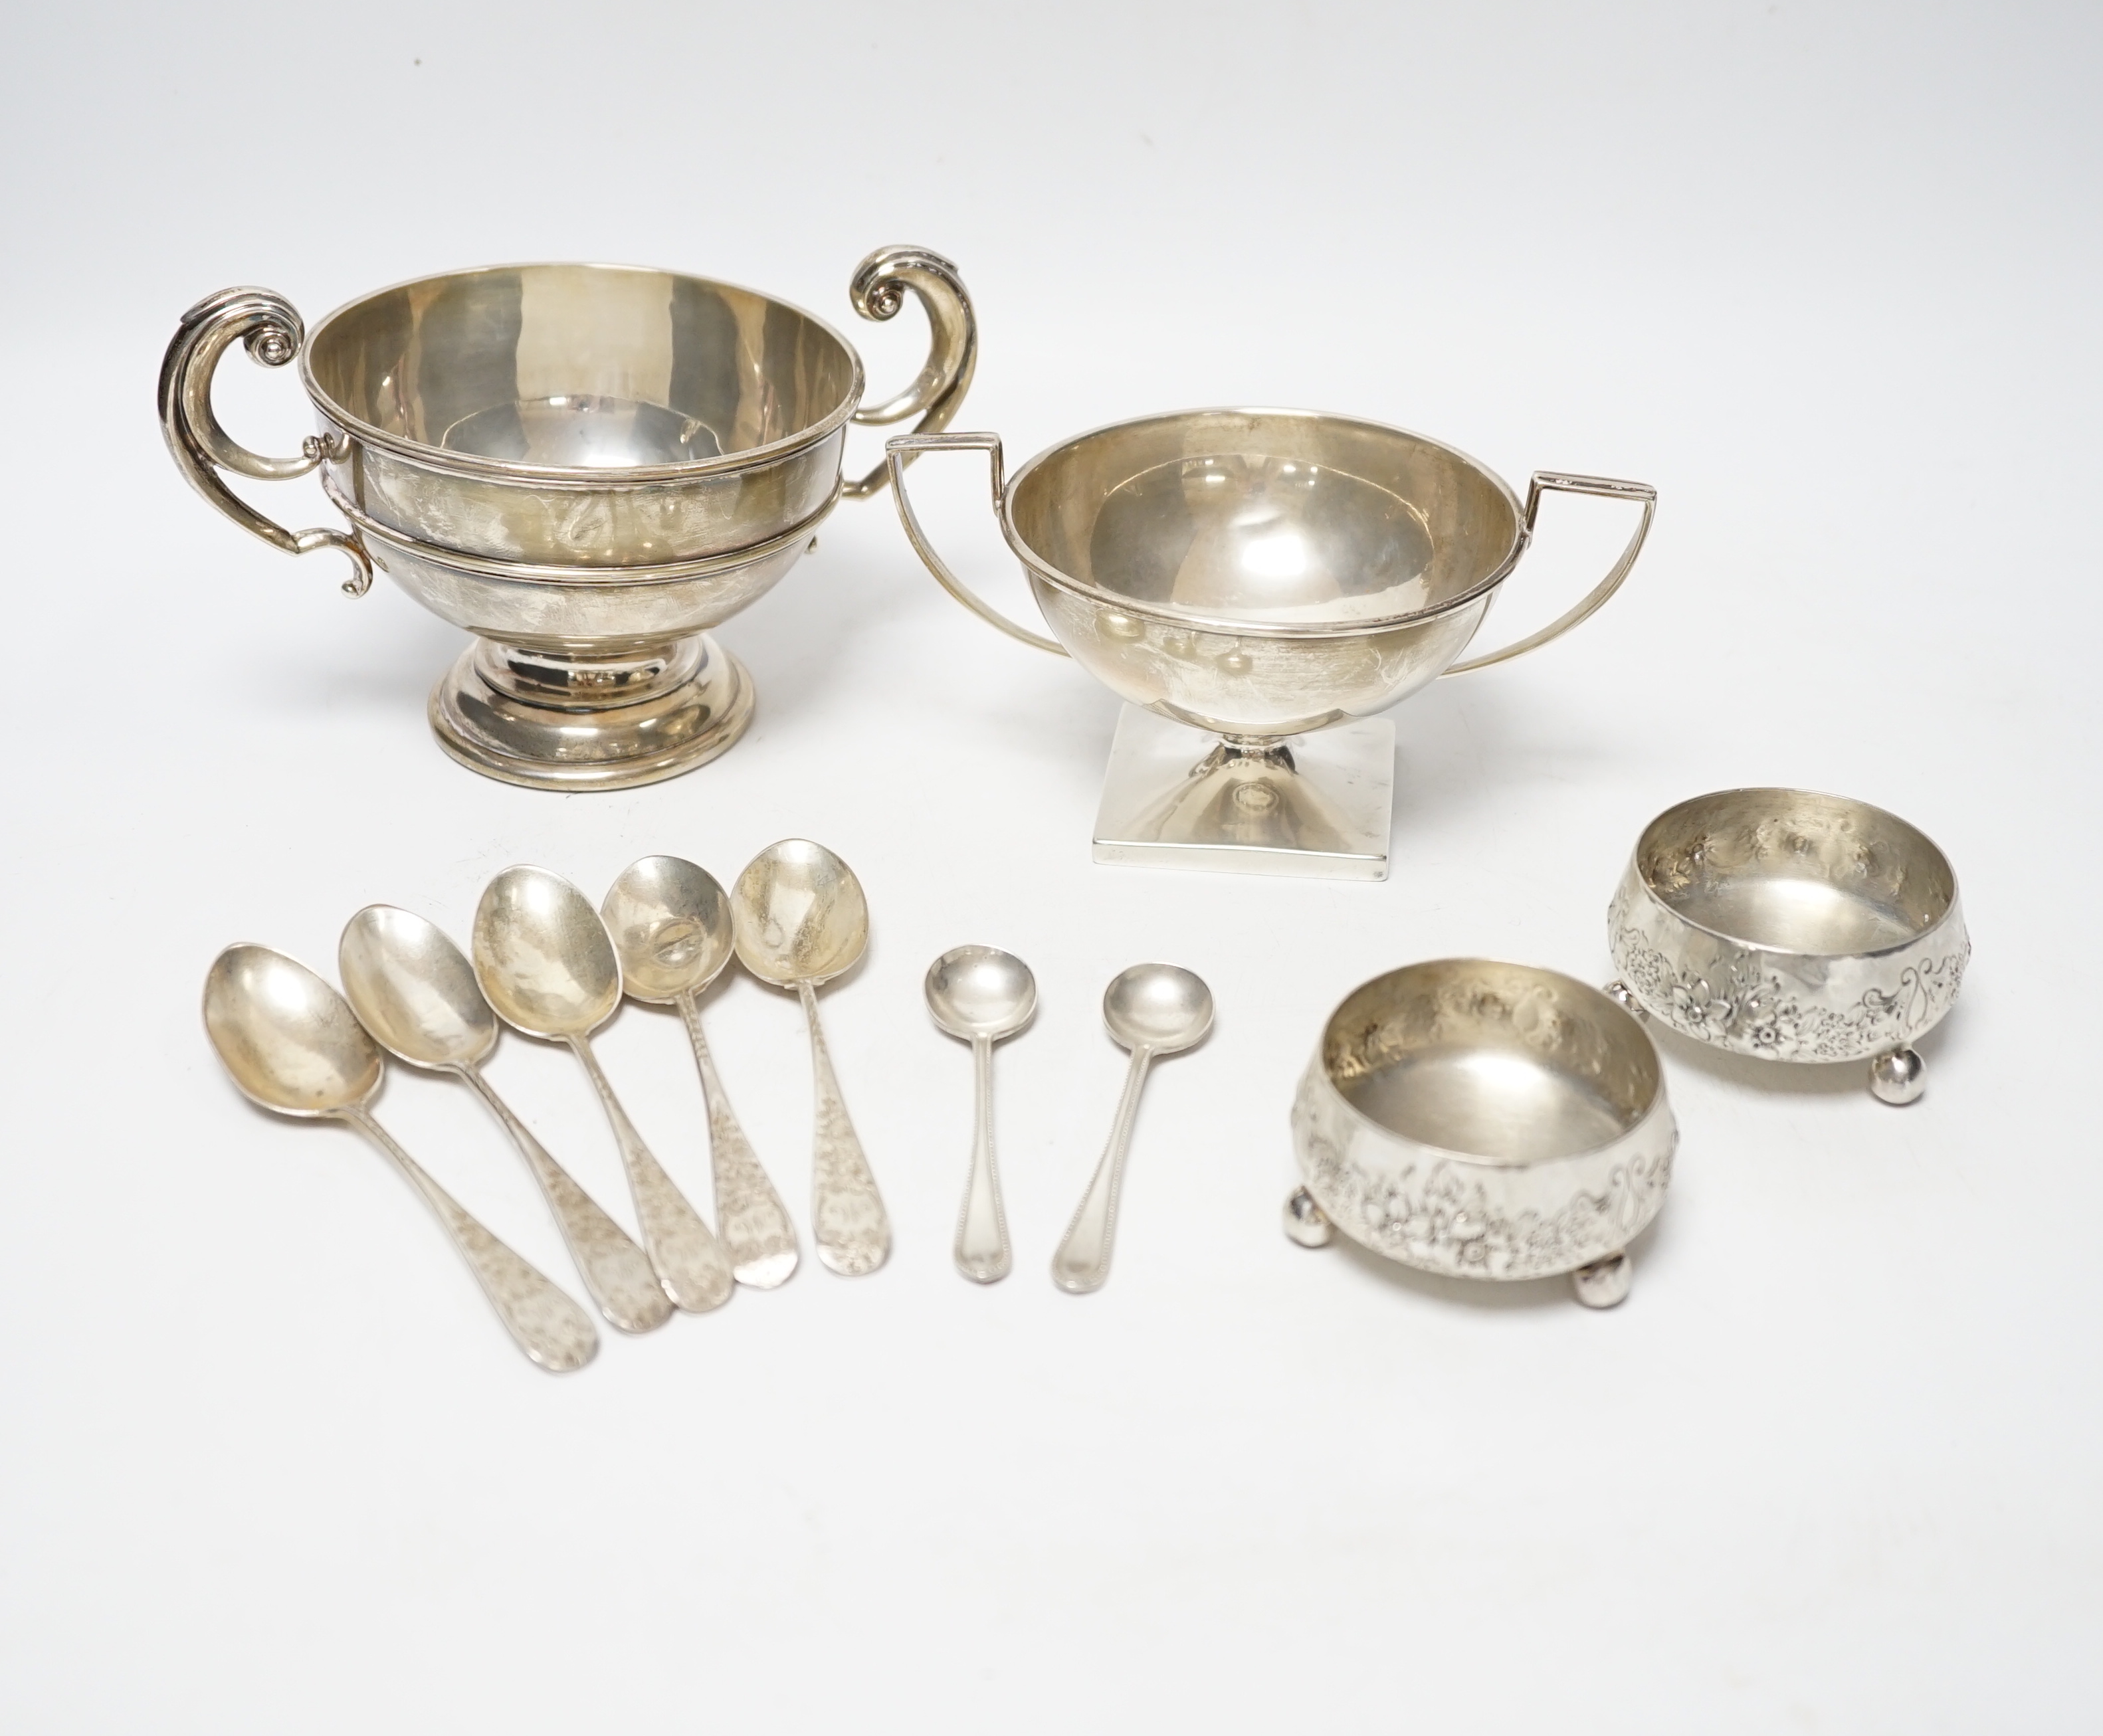 An Edwardian silver two handled bowl, Chester, 1902, diameter 10.4cm, a sterling bowl, a pair of engraved silver tub salts and matching salt spoons, Mappin & Webb, Sheffield, 1908 and a set of five silver teaspoons.